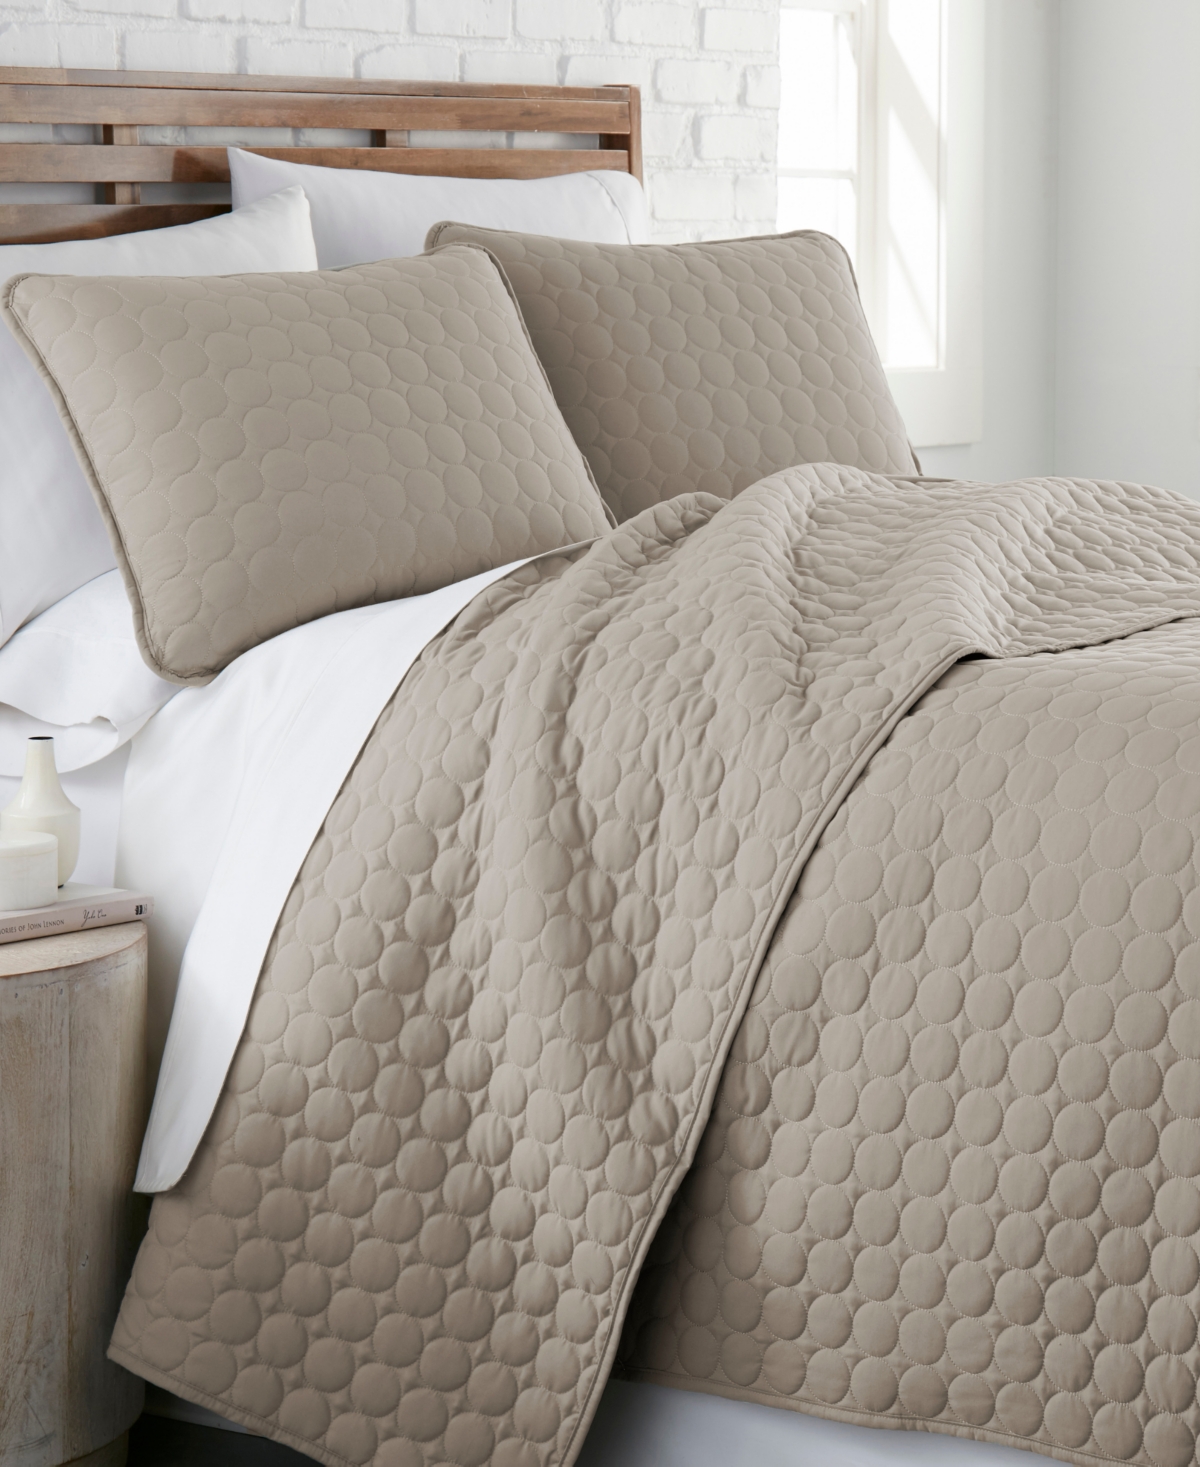 Southshore Fine Linens Ultra-soft Lightweight 3-piece Quilt And Sham Set, Twin/twin Xl In Taupe